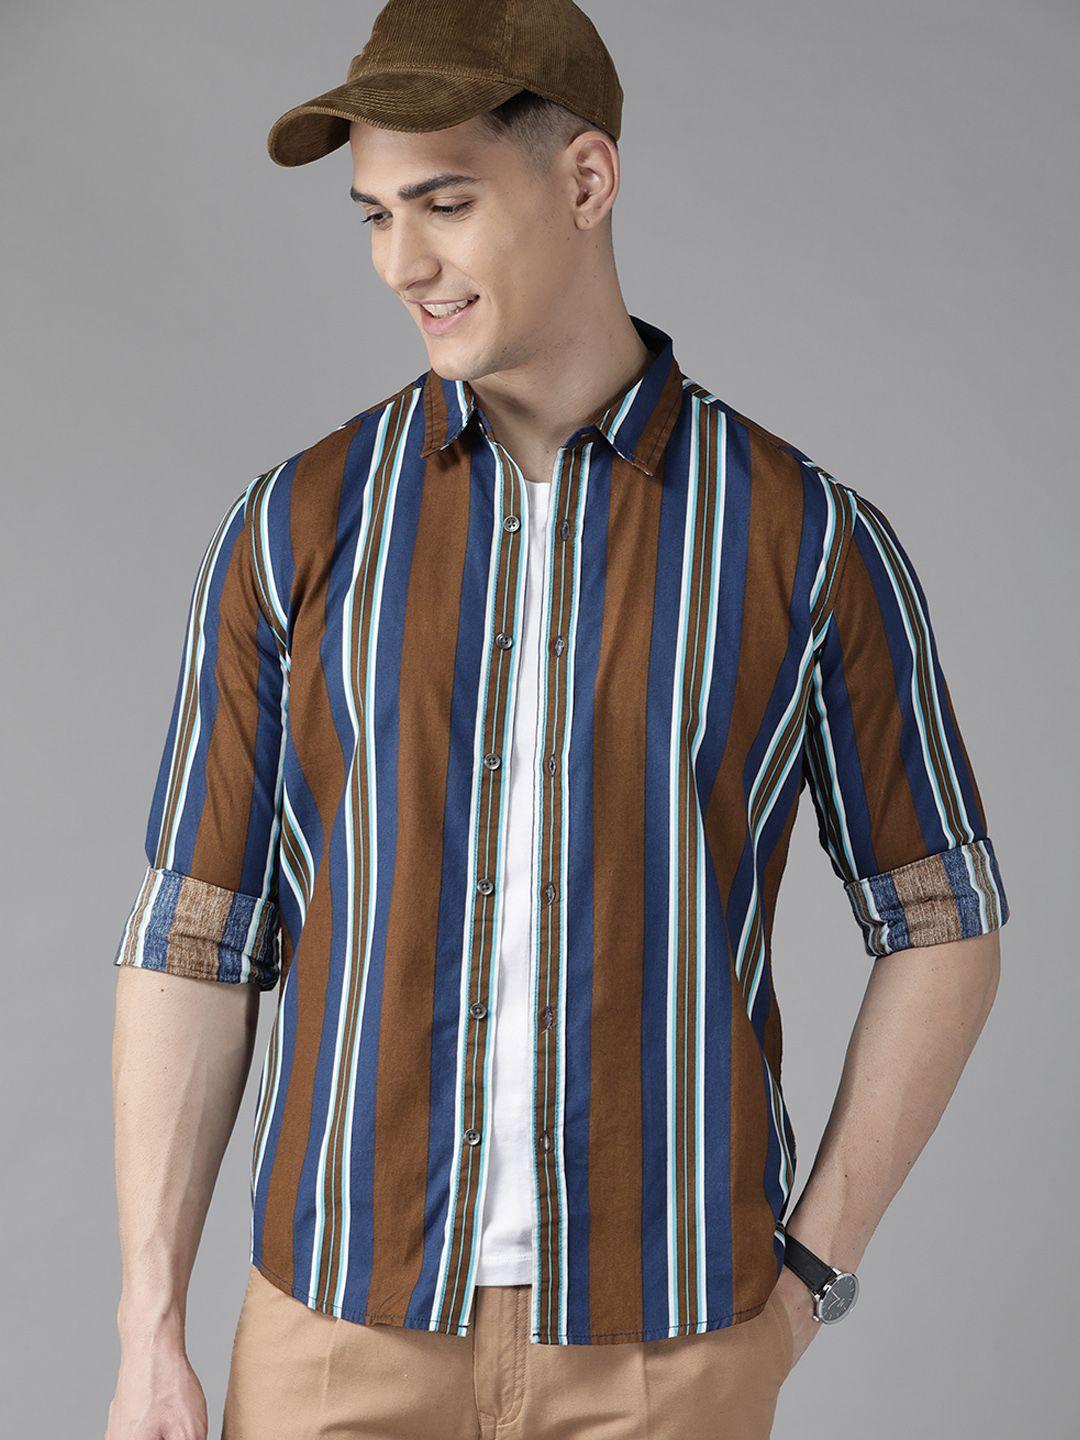 beat london by pepe jeans men brown & navy blue slim fit striped pure cotton shirt